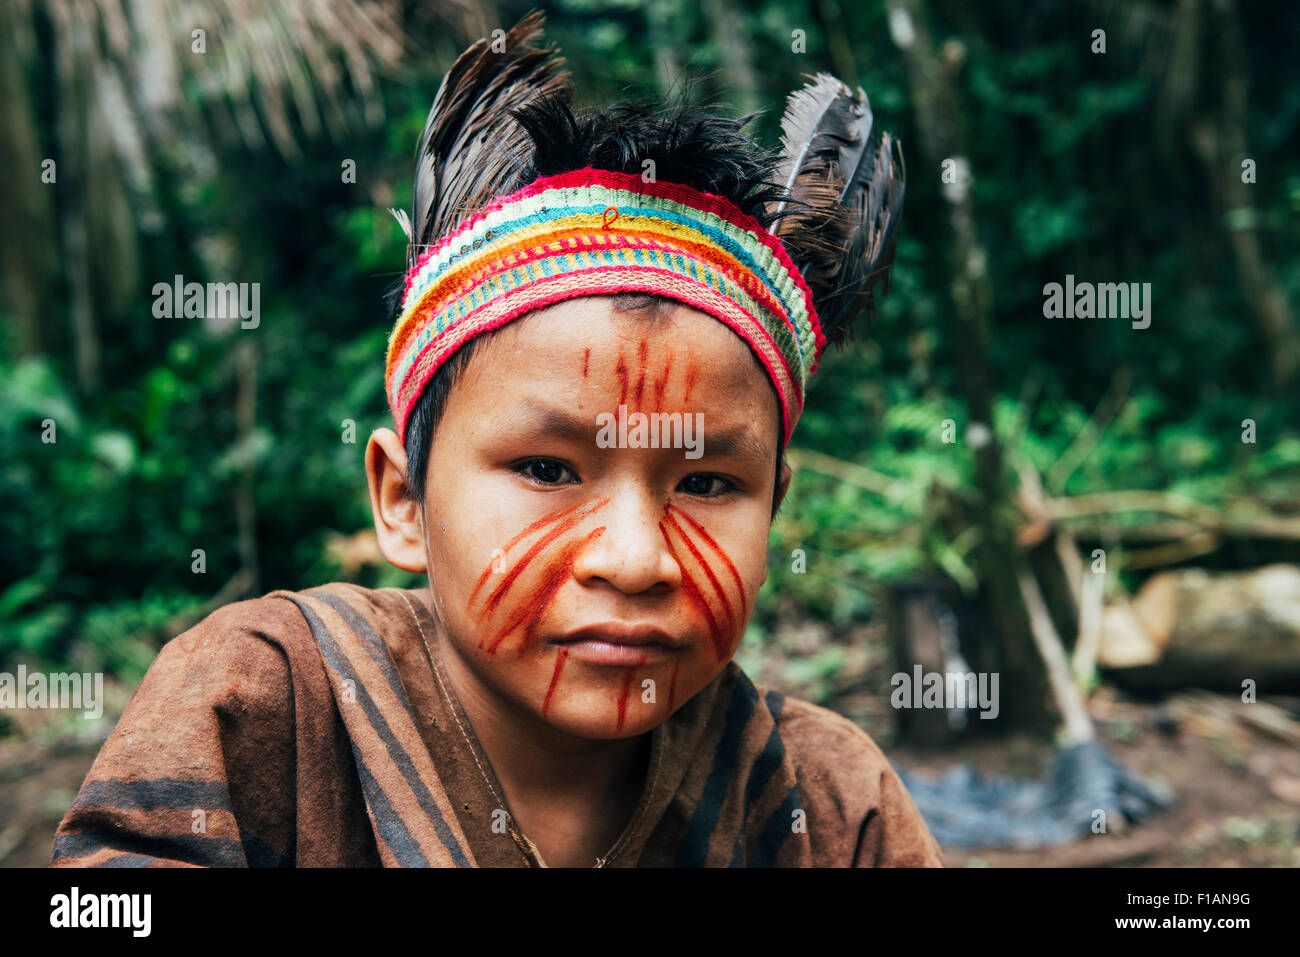 Peru, Madre de Dios Region, portrait of young boy wearing indigenous clothes Stock Photo